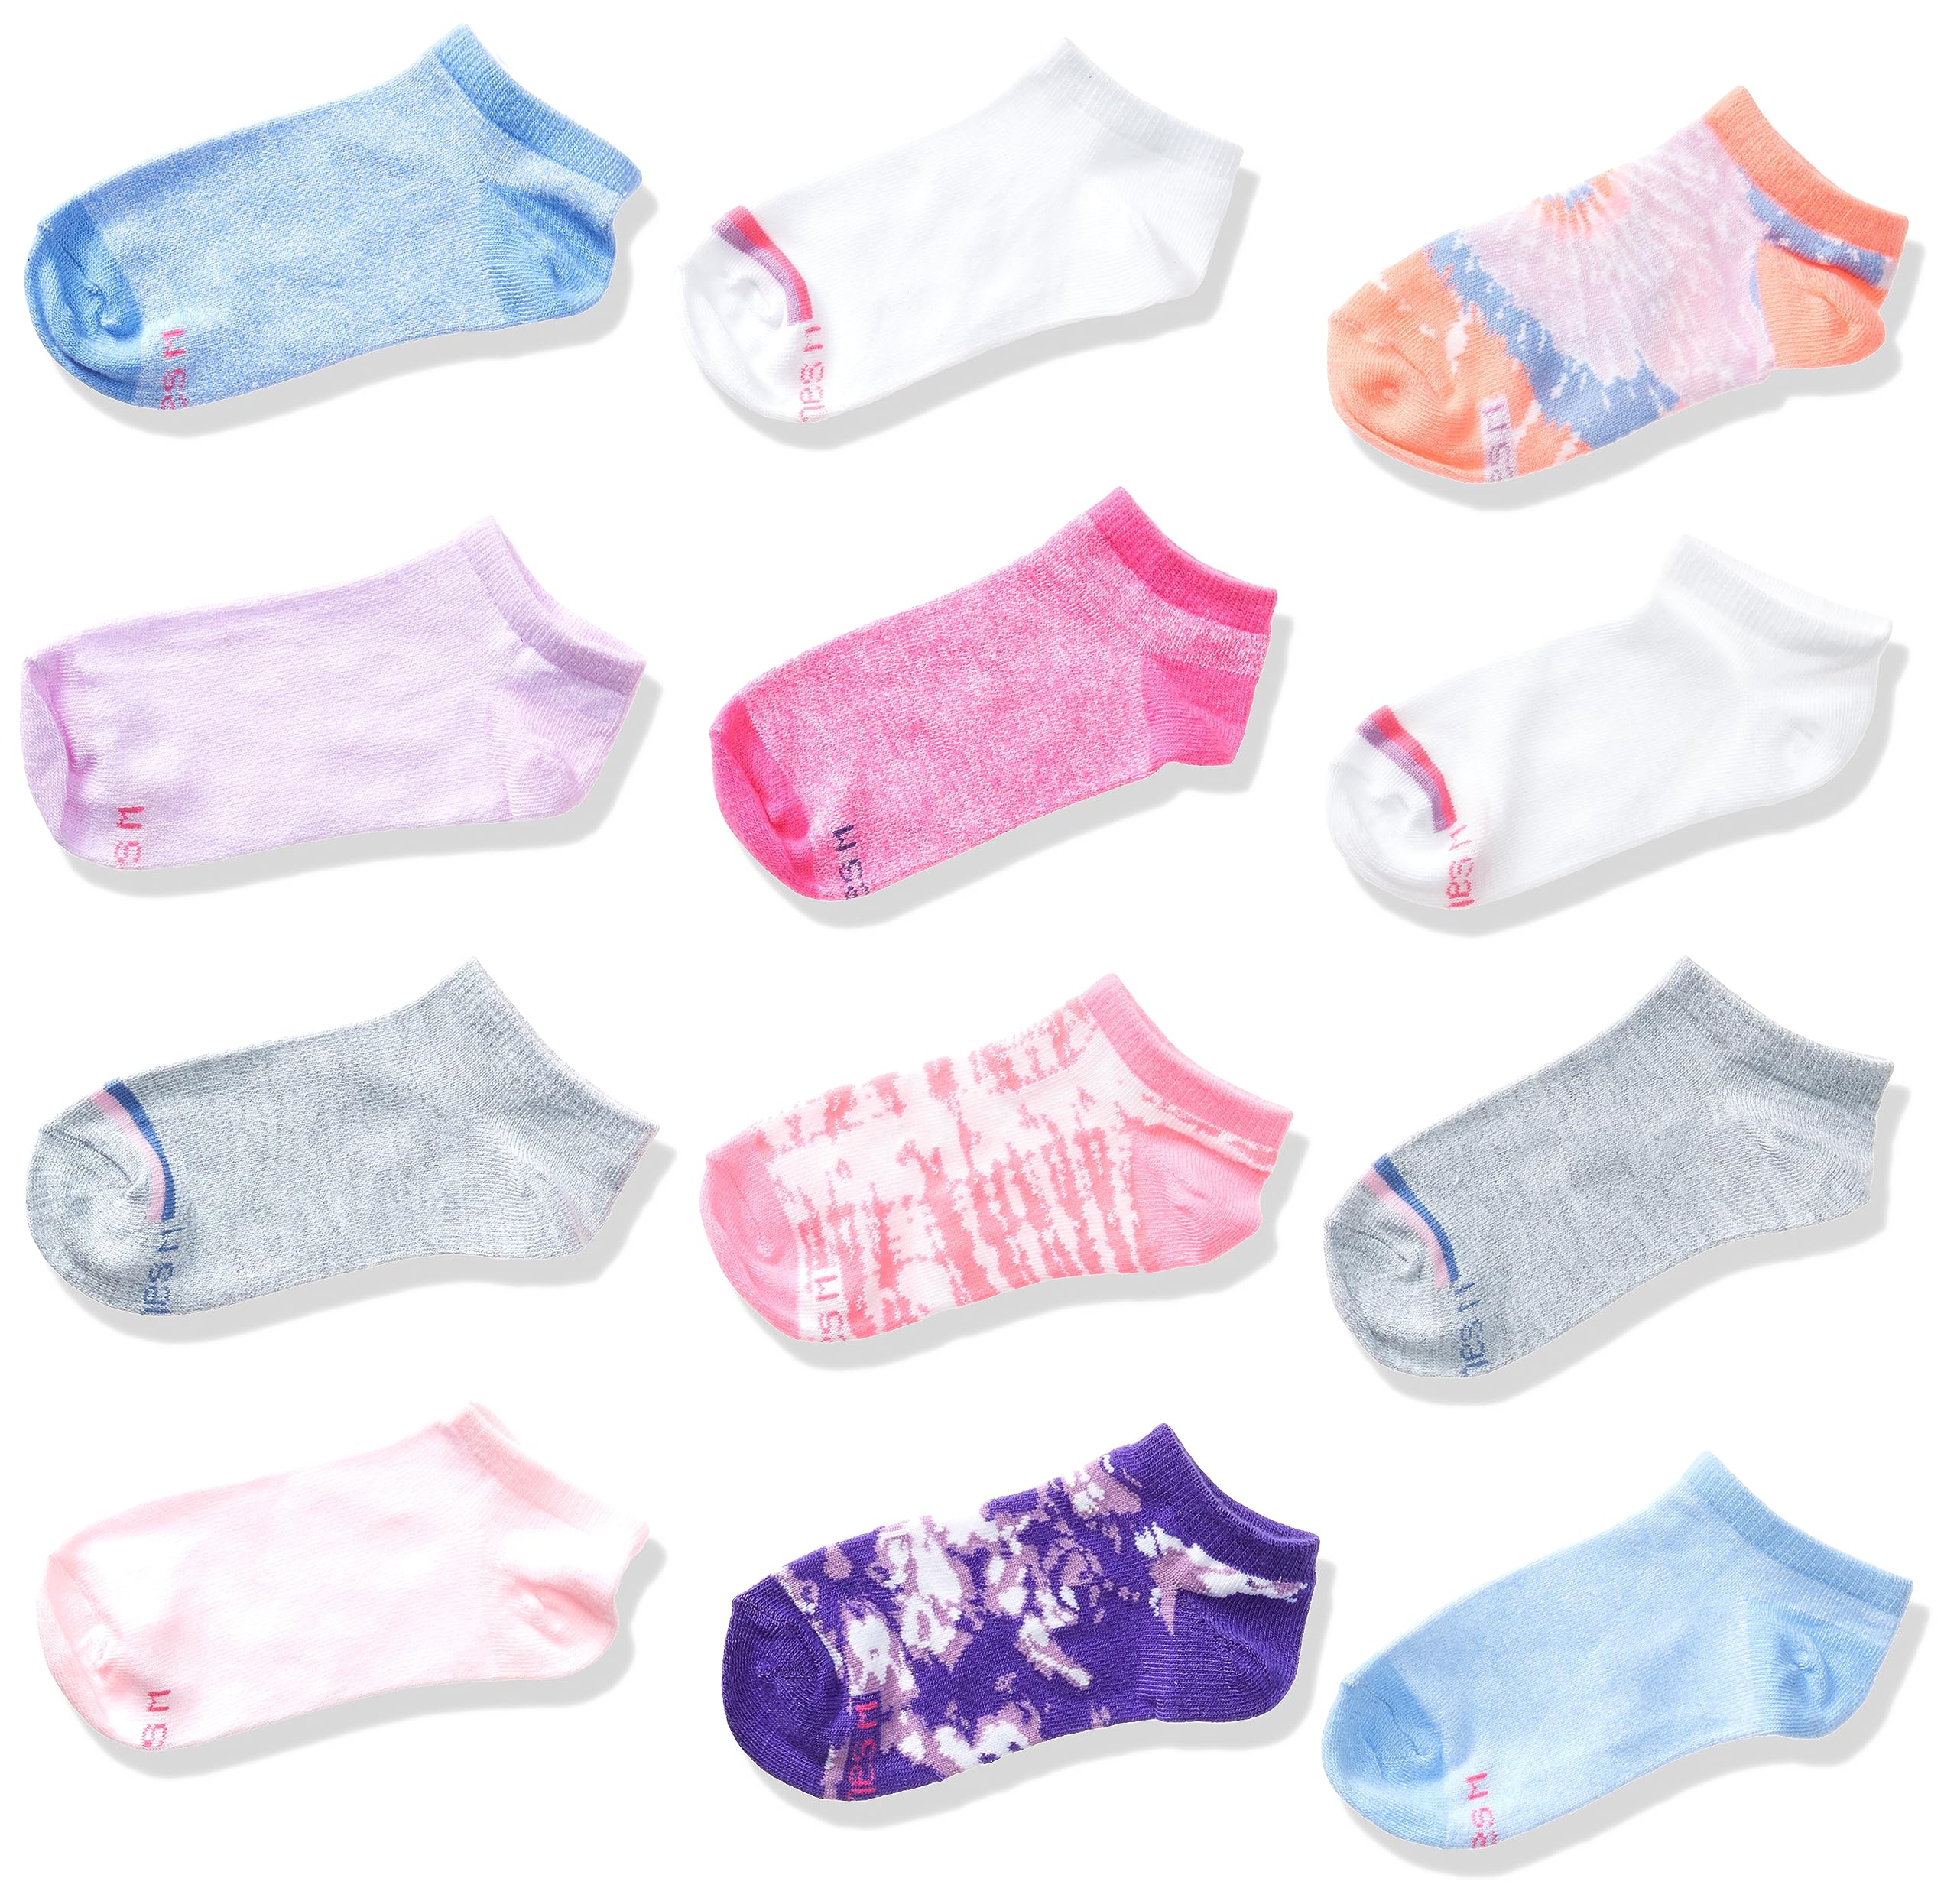 Hanes Girls, Ankle and No Show Fashion, Soft Socks, 12-Pack